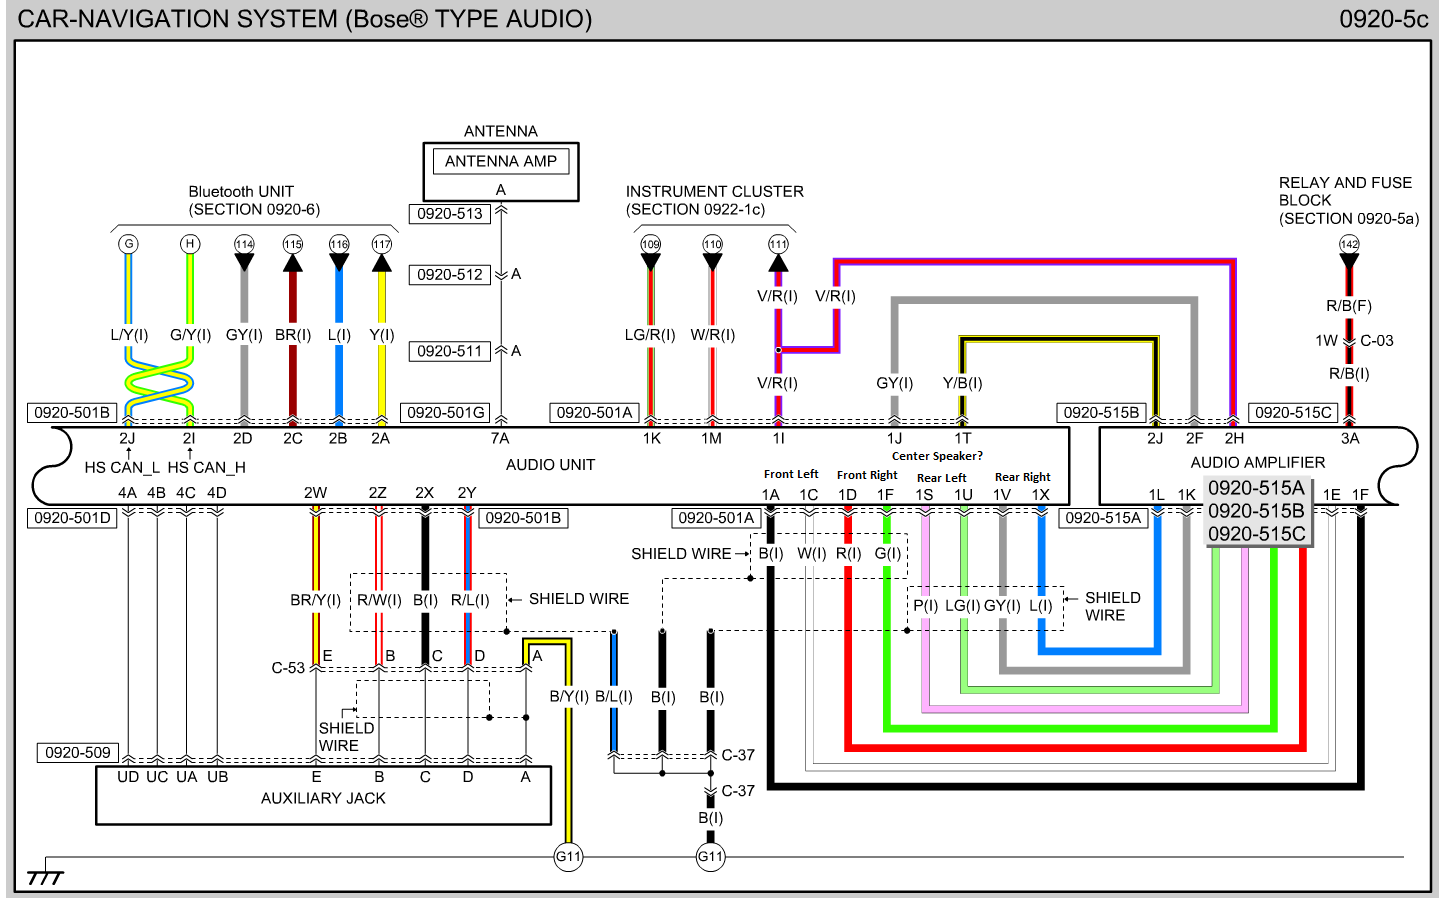 Mazda Bose Factory Wiring Diagram For Car Stereo from www.mazdas247.com